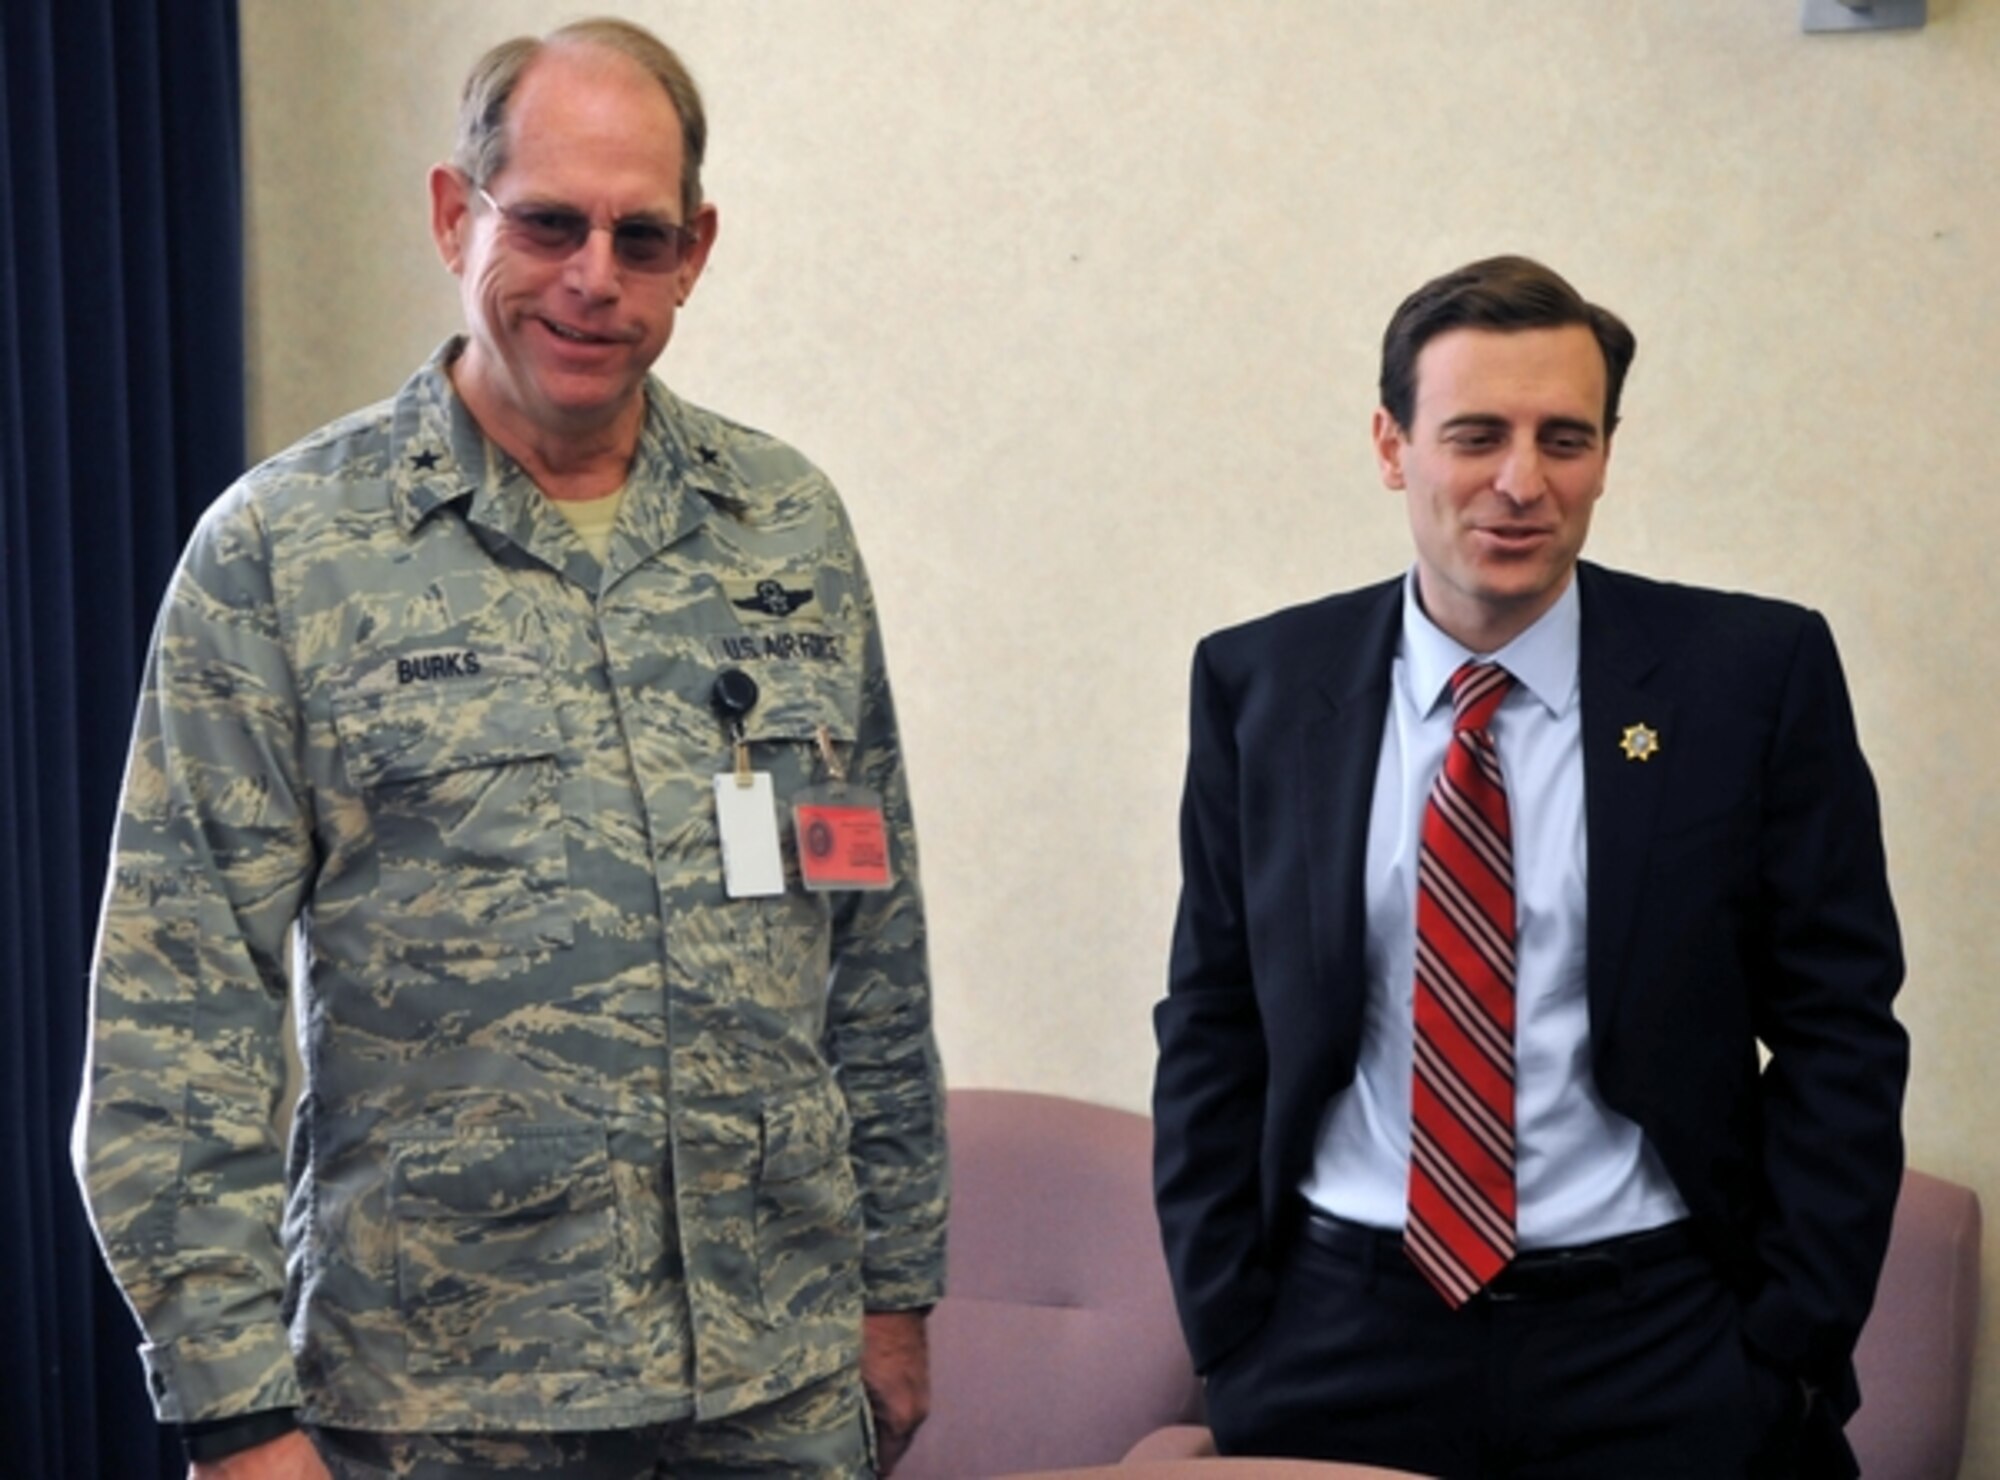 Nevada National Guard Adjutant General, Brig. Gen. William Burks, left, meets with Nevada Attorney General Adam Laxalt on Feb. 12 to discuss the potential creation of a military legal assistance program. Laxalt, elected in November and a former Navy Judge Advocate General, said he wants to create an Office of Military Legal Assistance to match veterans and private lawyers looking to work pro-bono on certain civil cases.  NV ANG photo by Tech. Sgt. Emerson Marcus (released). 
